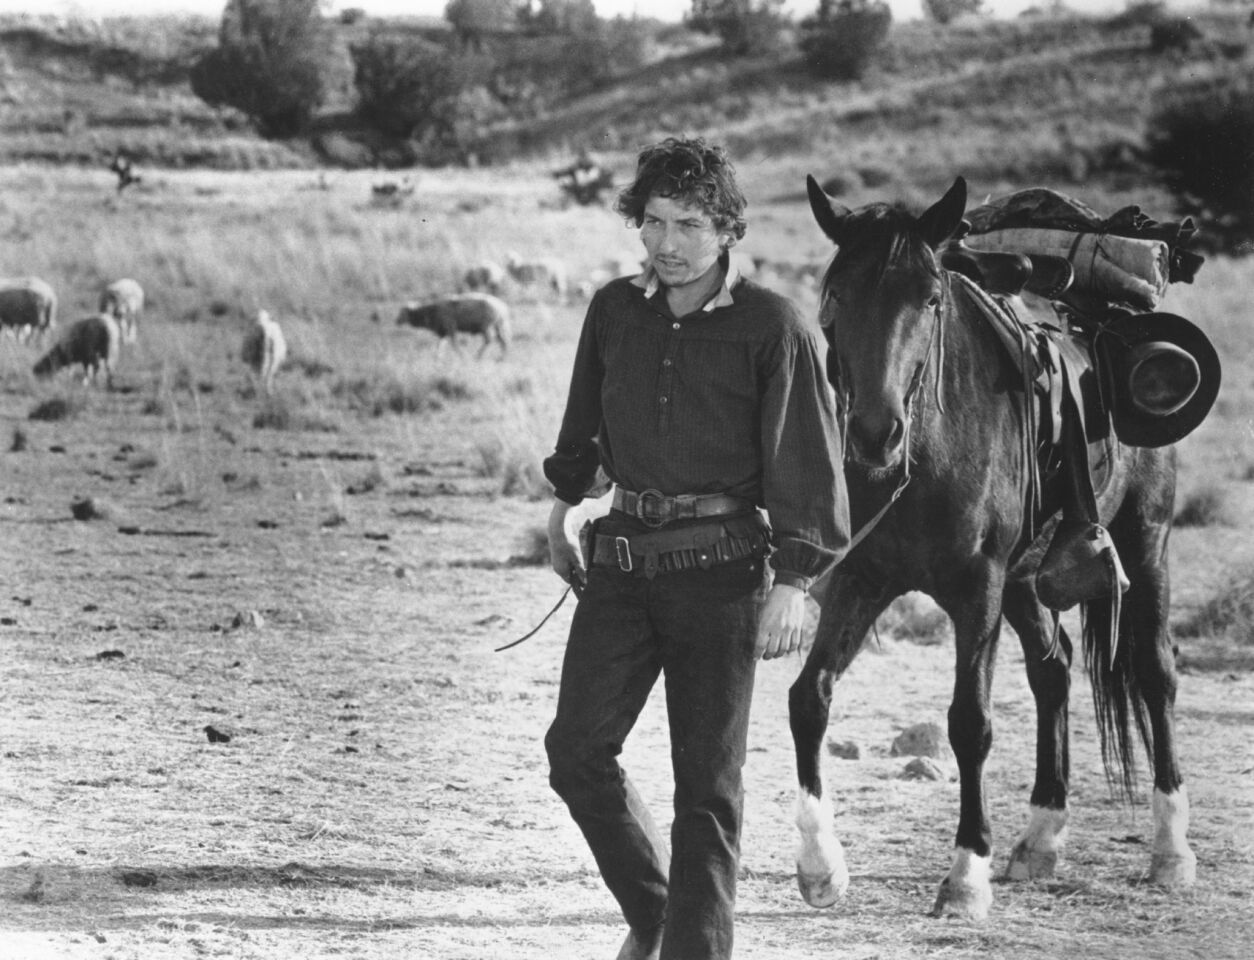 Bob Dylan appears in a film still for "Pat Garrett & Billy the Kid" (for which he also did the soundtrack) which was released in May 1973 and filmed in Durango, Mexico.